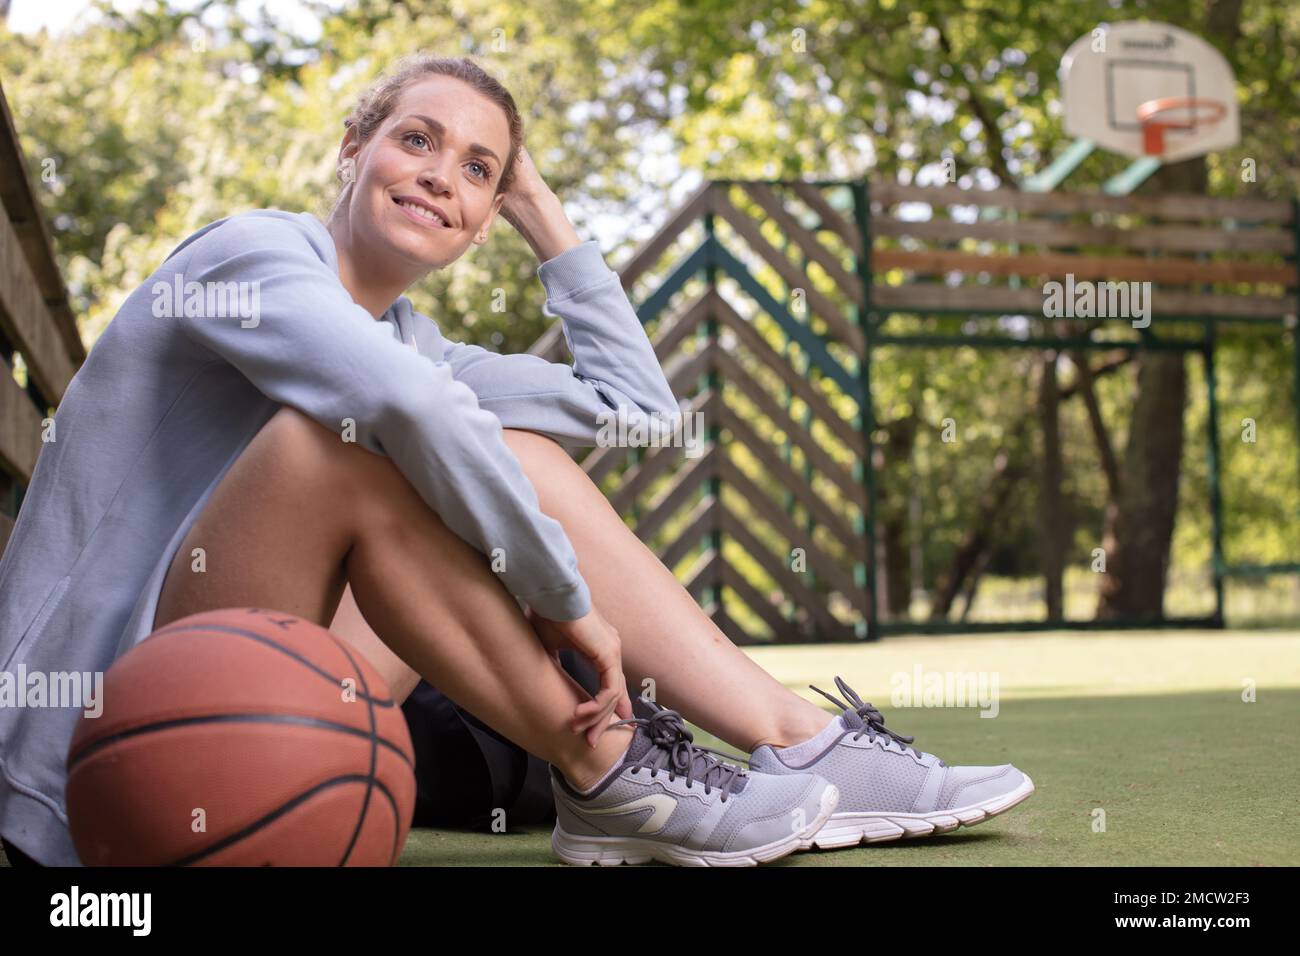 Woman in Pink Sweater Sitting on a Basketball · Free Stock Photo